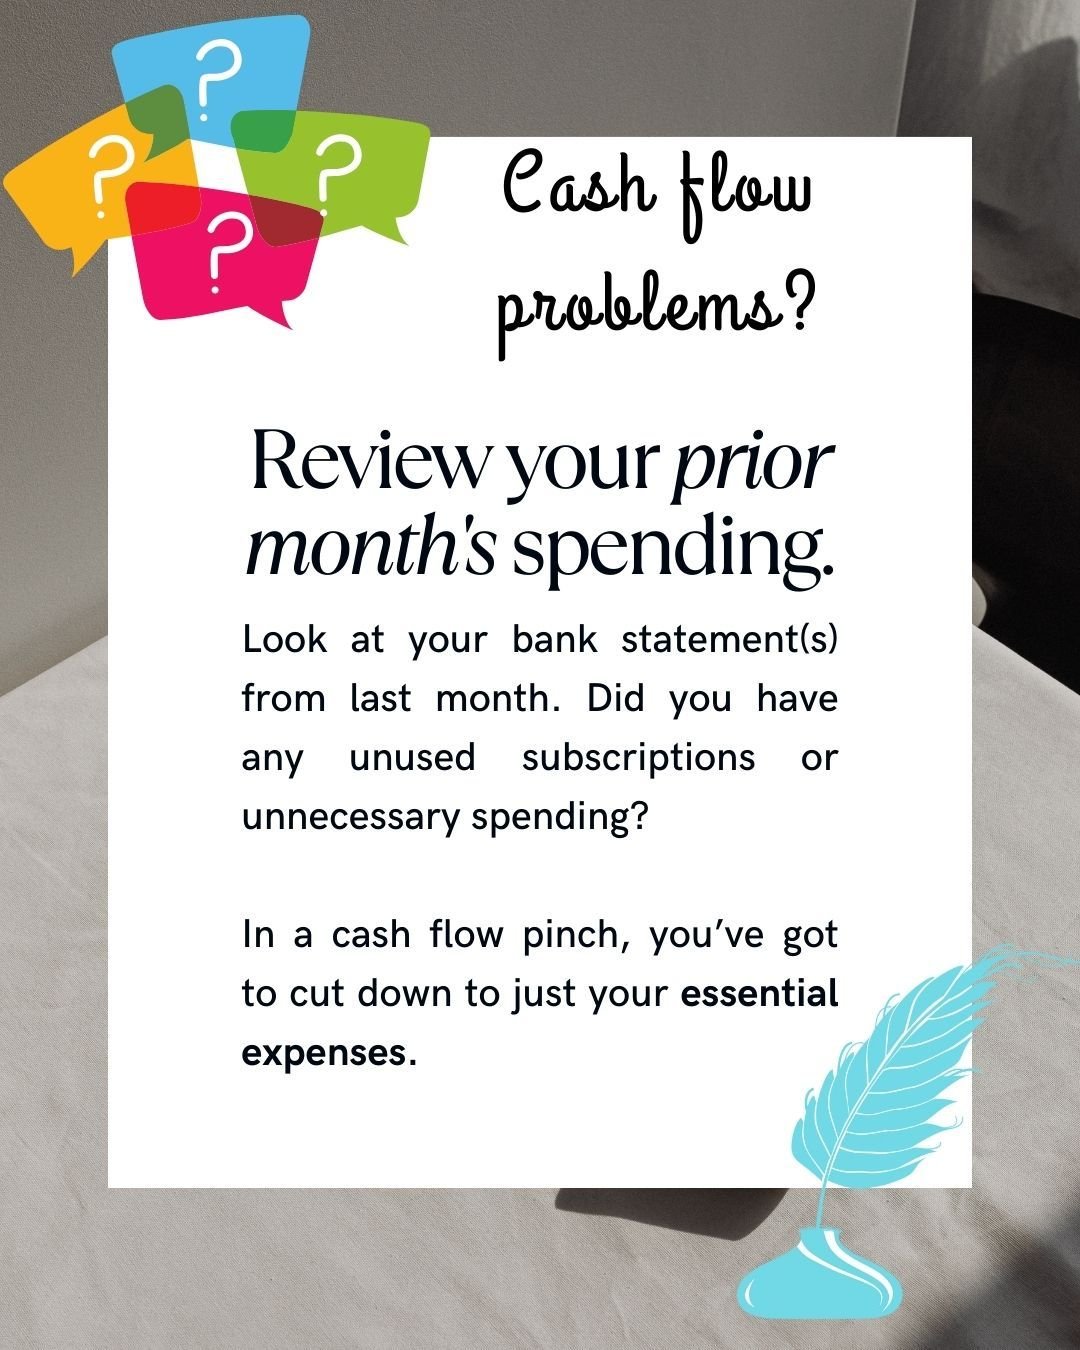 Feeling the pressure of a Cash Flow Crunch? 😣

Review your prior month's spending: 
Review your bank statements from last month.  Did you have any unused subscriptions or unnecessary spending? 

💰In a cash flow pinch, you've got to cut down to  jus